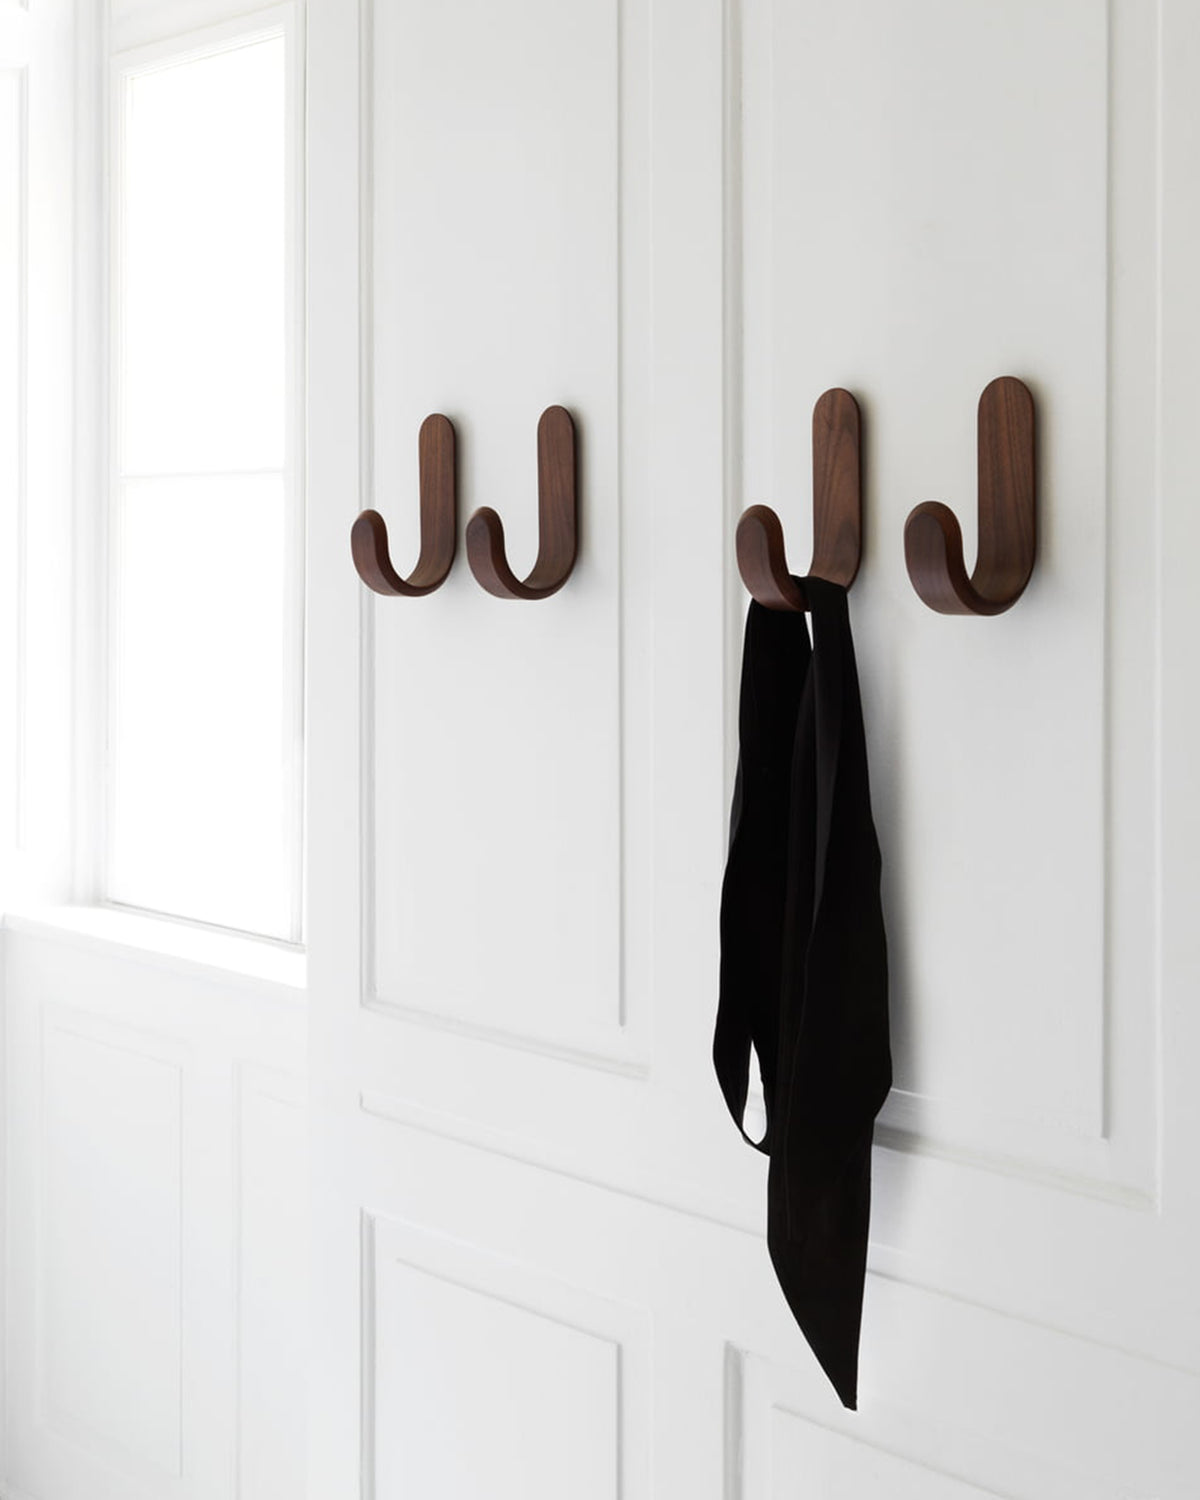 Help your kids keep things off the floor easily with these handy hooks. These are the perfect hook to hang up school bags, jackets, hats and more.   This generously sized curve is a wall hook in its most traditional and symbolic form. Shaped like a J, this wooden wall hook has a classic, uncomplicated look.